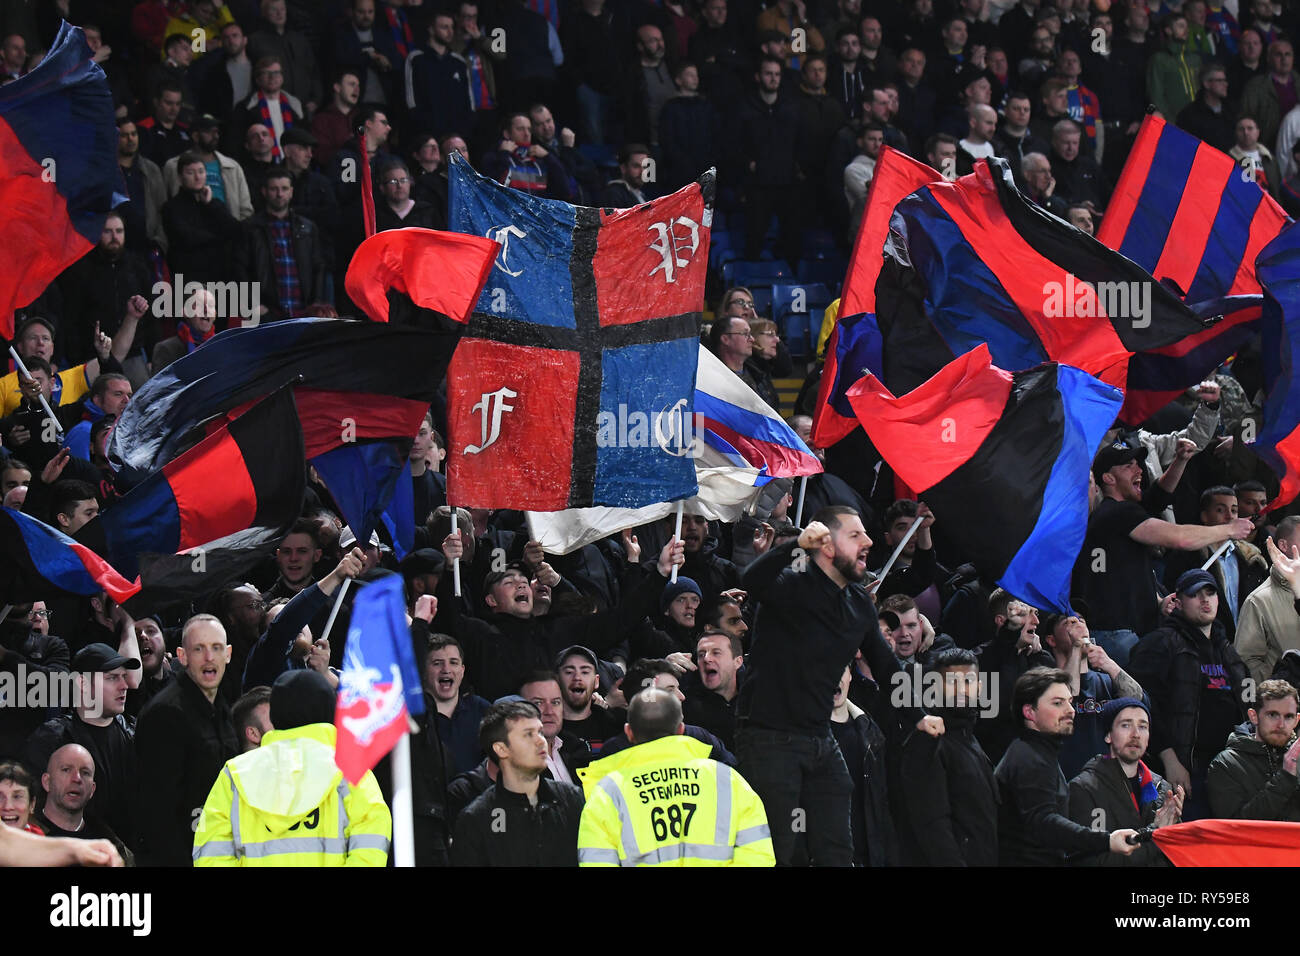 LONDON, ENGLAND - FEBRUARY 27, 2019: Palace ultras pictured during the 2018/19 Premier League game between Crystal Palace FC and Manchester United at Selhurst Park. Stock Photo